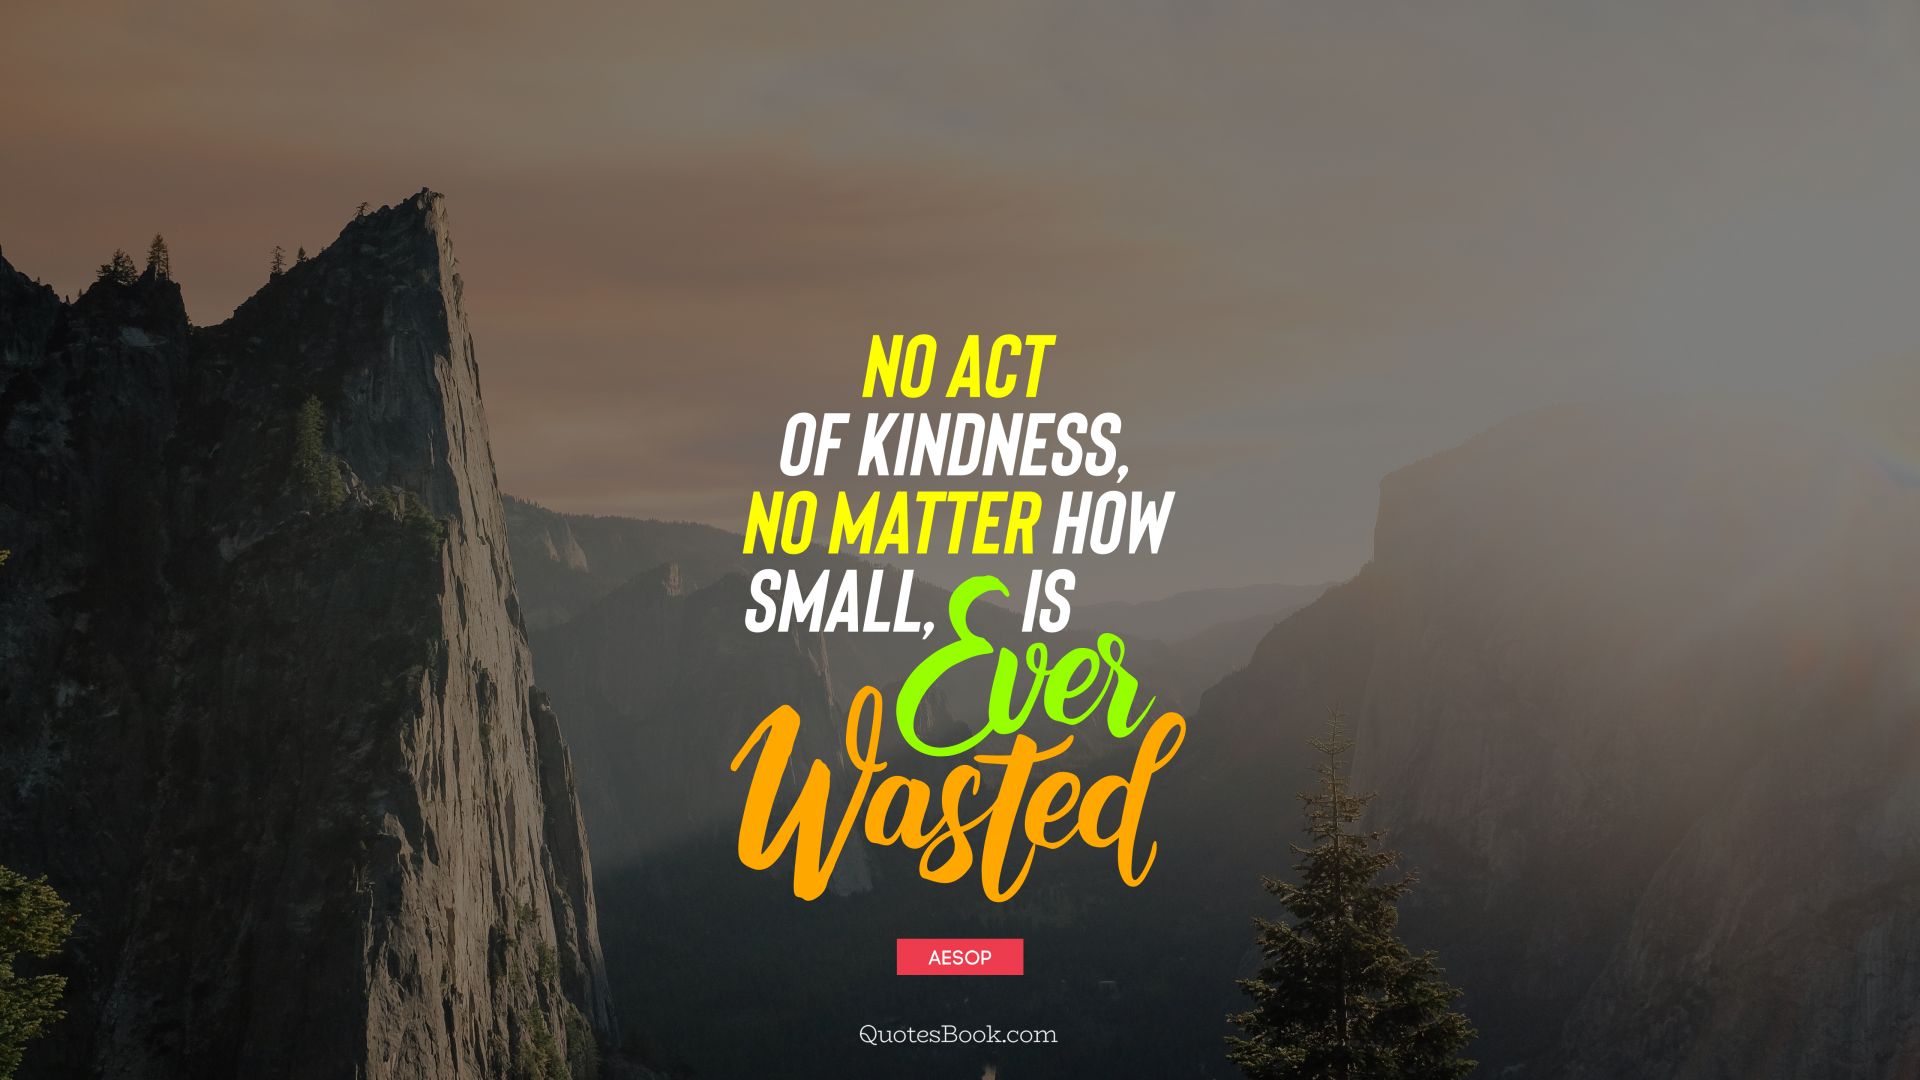 No act of kindness, no matter how small, is ever wasted. - Quote by Aesop